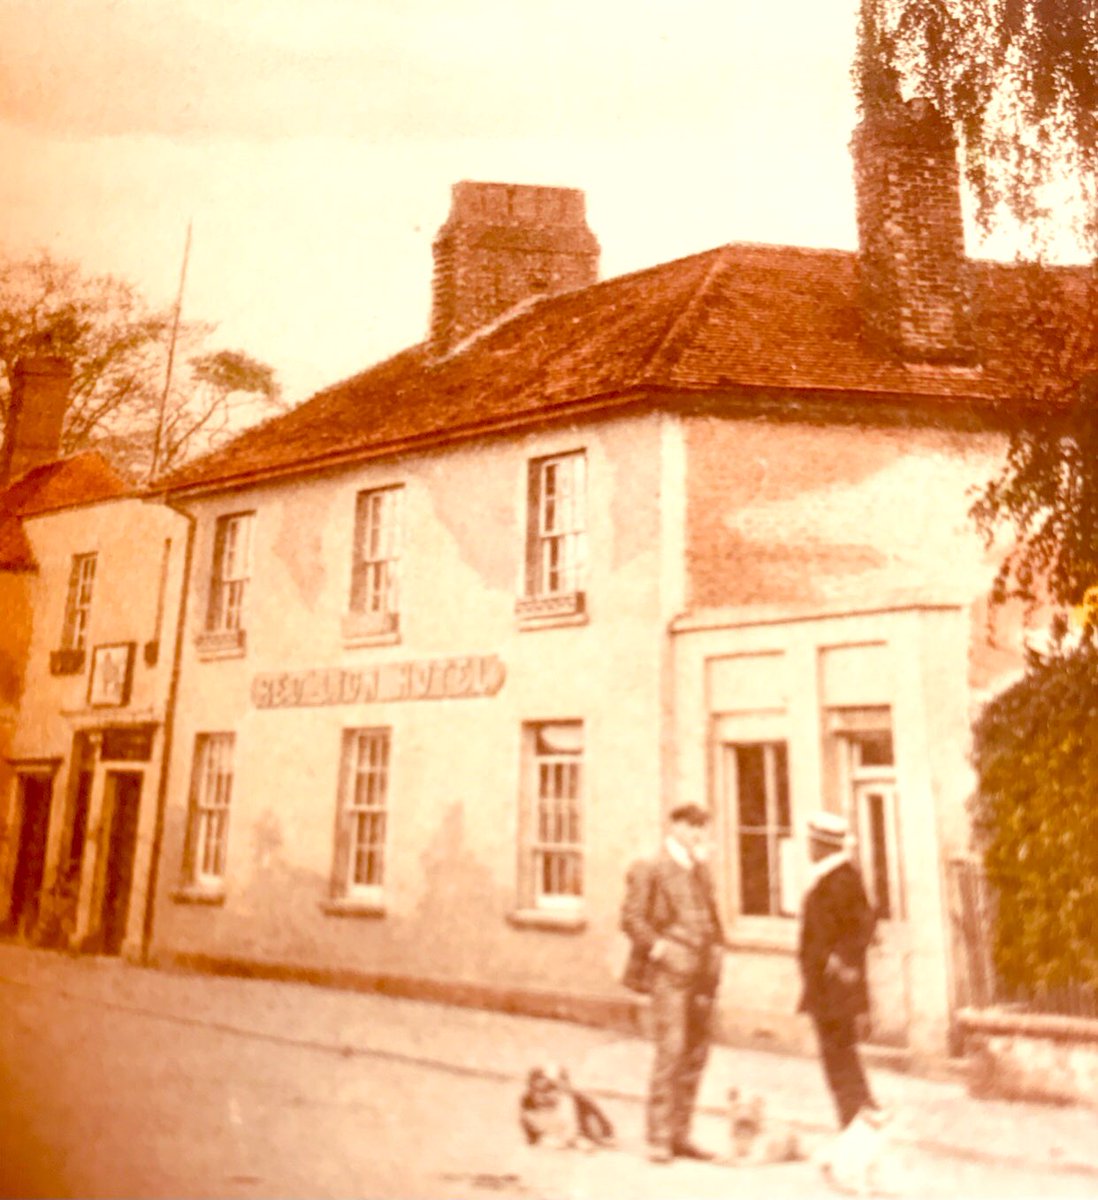 Milford, Godalming, Surrey. The old Red Lion Hotel (now Tesco!). Postcard c 1915, published by F. Frith & Co, Reigate. 
📷: Gentlemen with dogs: one of whom (with white dog) features in nearly all postcards of Milford at this time! 🙂 Believed to be a Mr Nash? From our collection